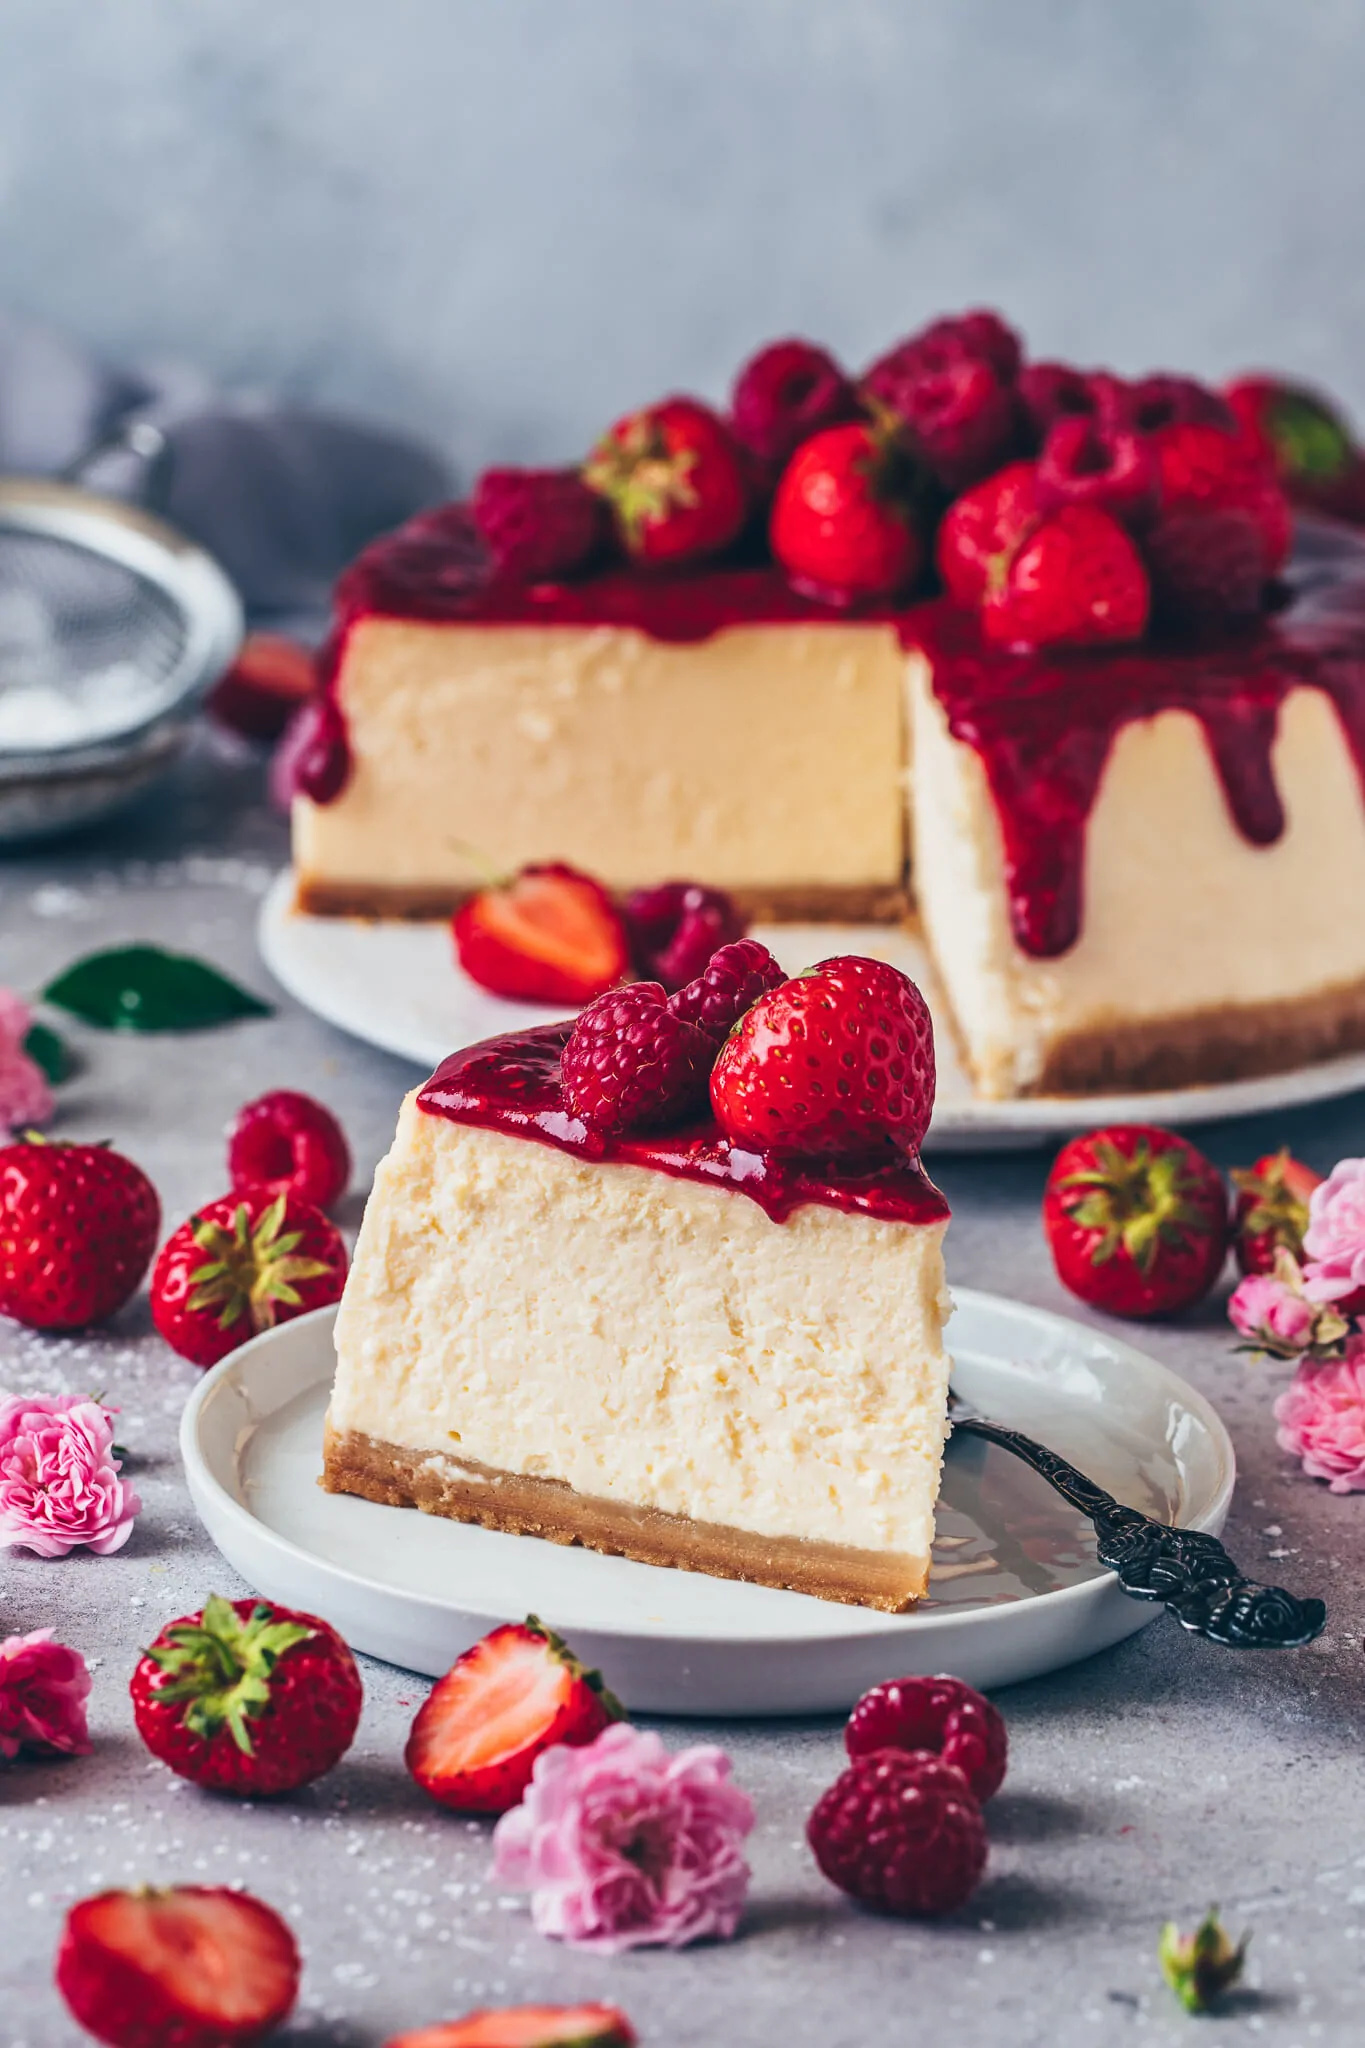 Cheesecake: Typical toppings include sour cream, fruit sauces, chocolate or caramel syrup, nuts, whipped cream, or pieces of fruit. 1370x2050 HD Background.